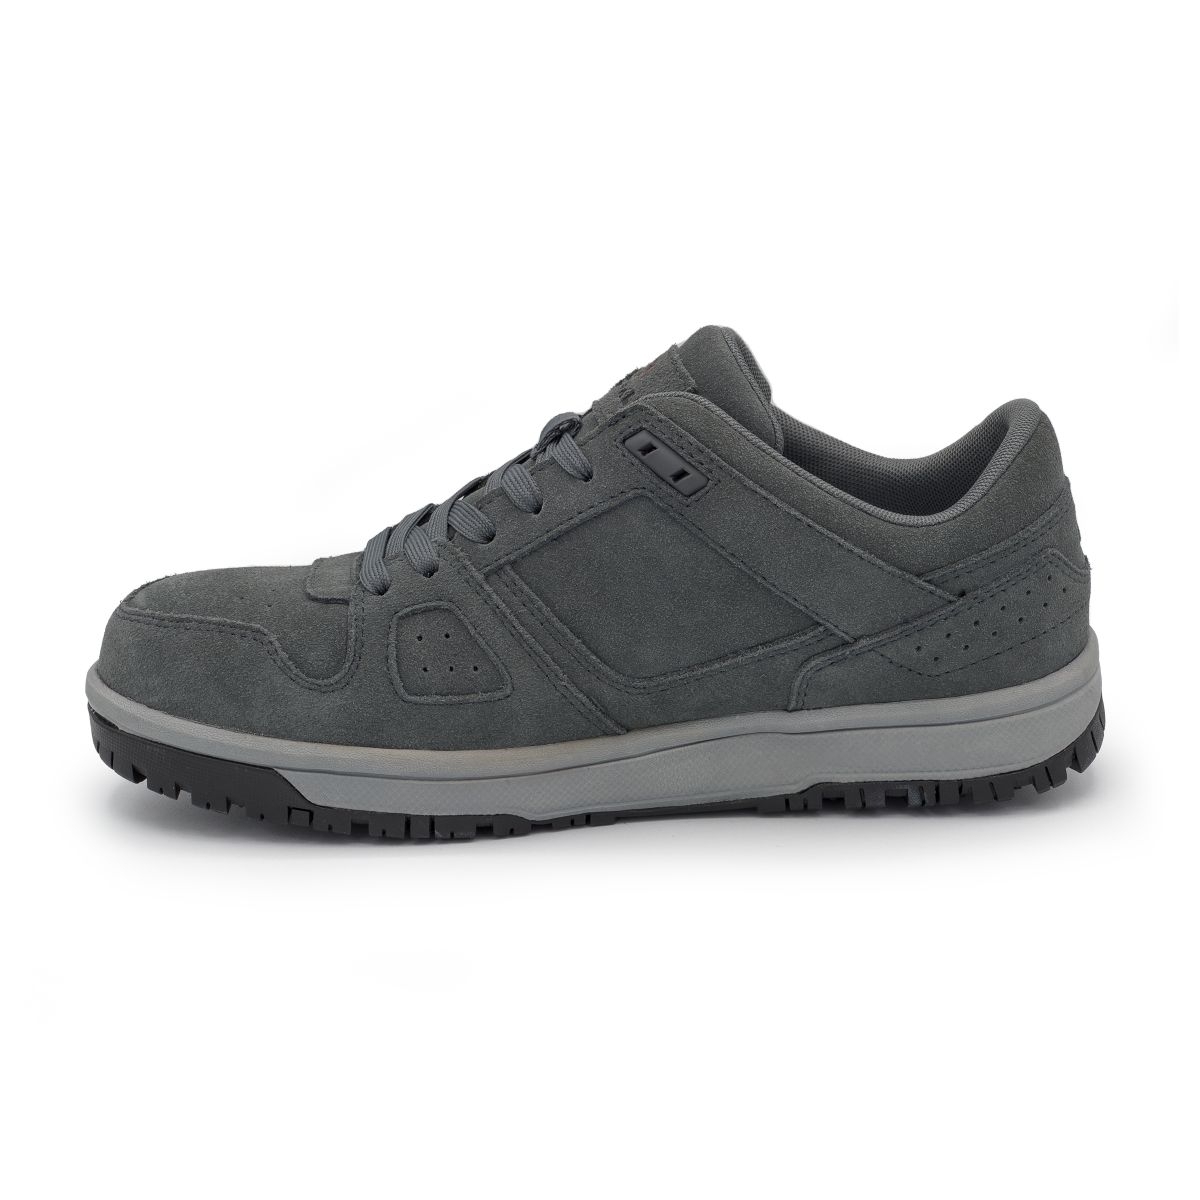 AIRWALK SAFETY Men's Mongo Composite Toe EH Work Shoe Charcoal/Grey - AW6301 CHARCOAL/GRAY - CHARCOAL/GRAY, 9.5-M